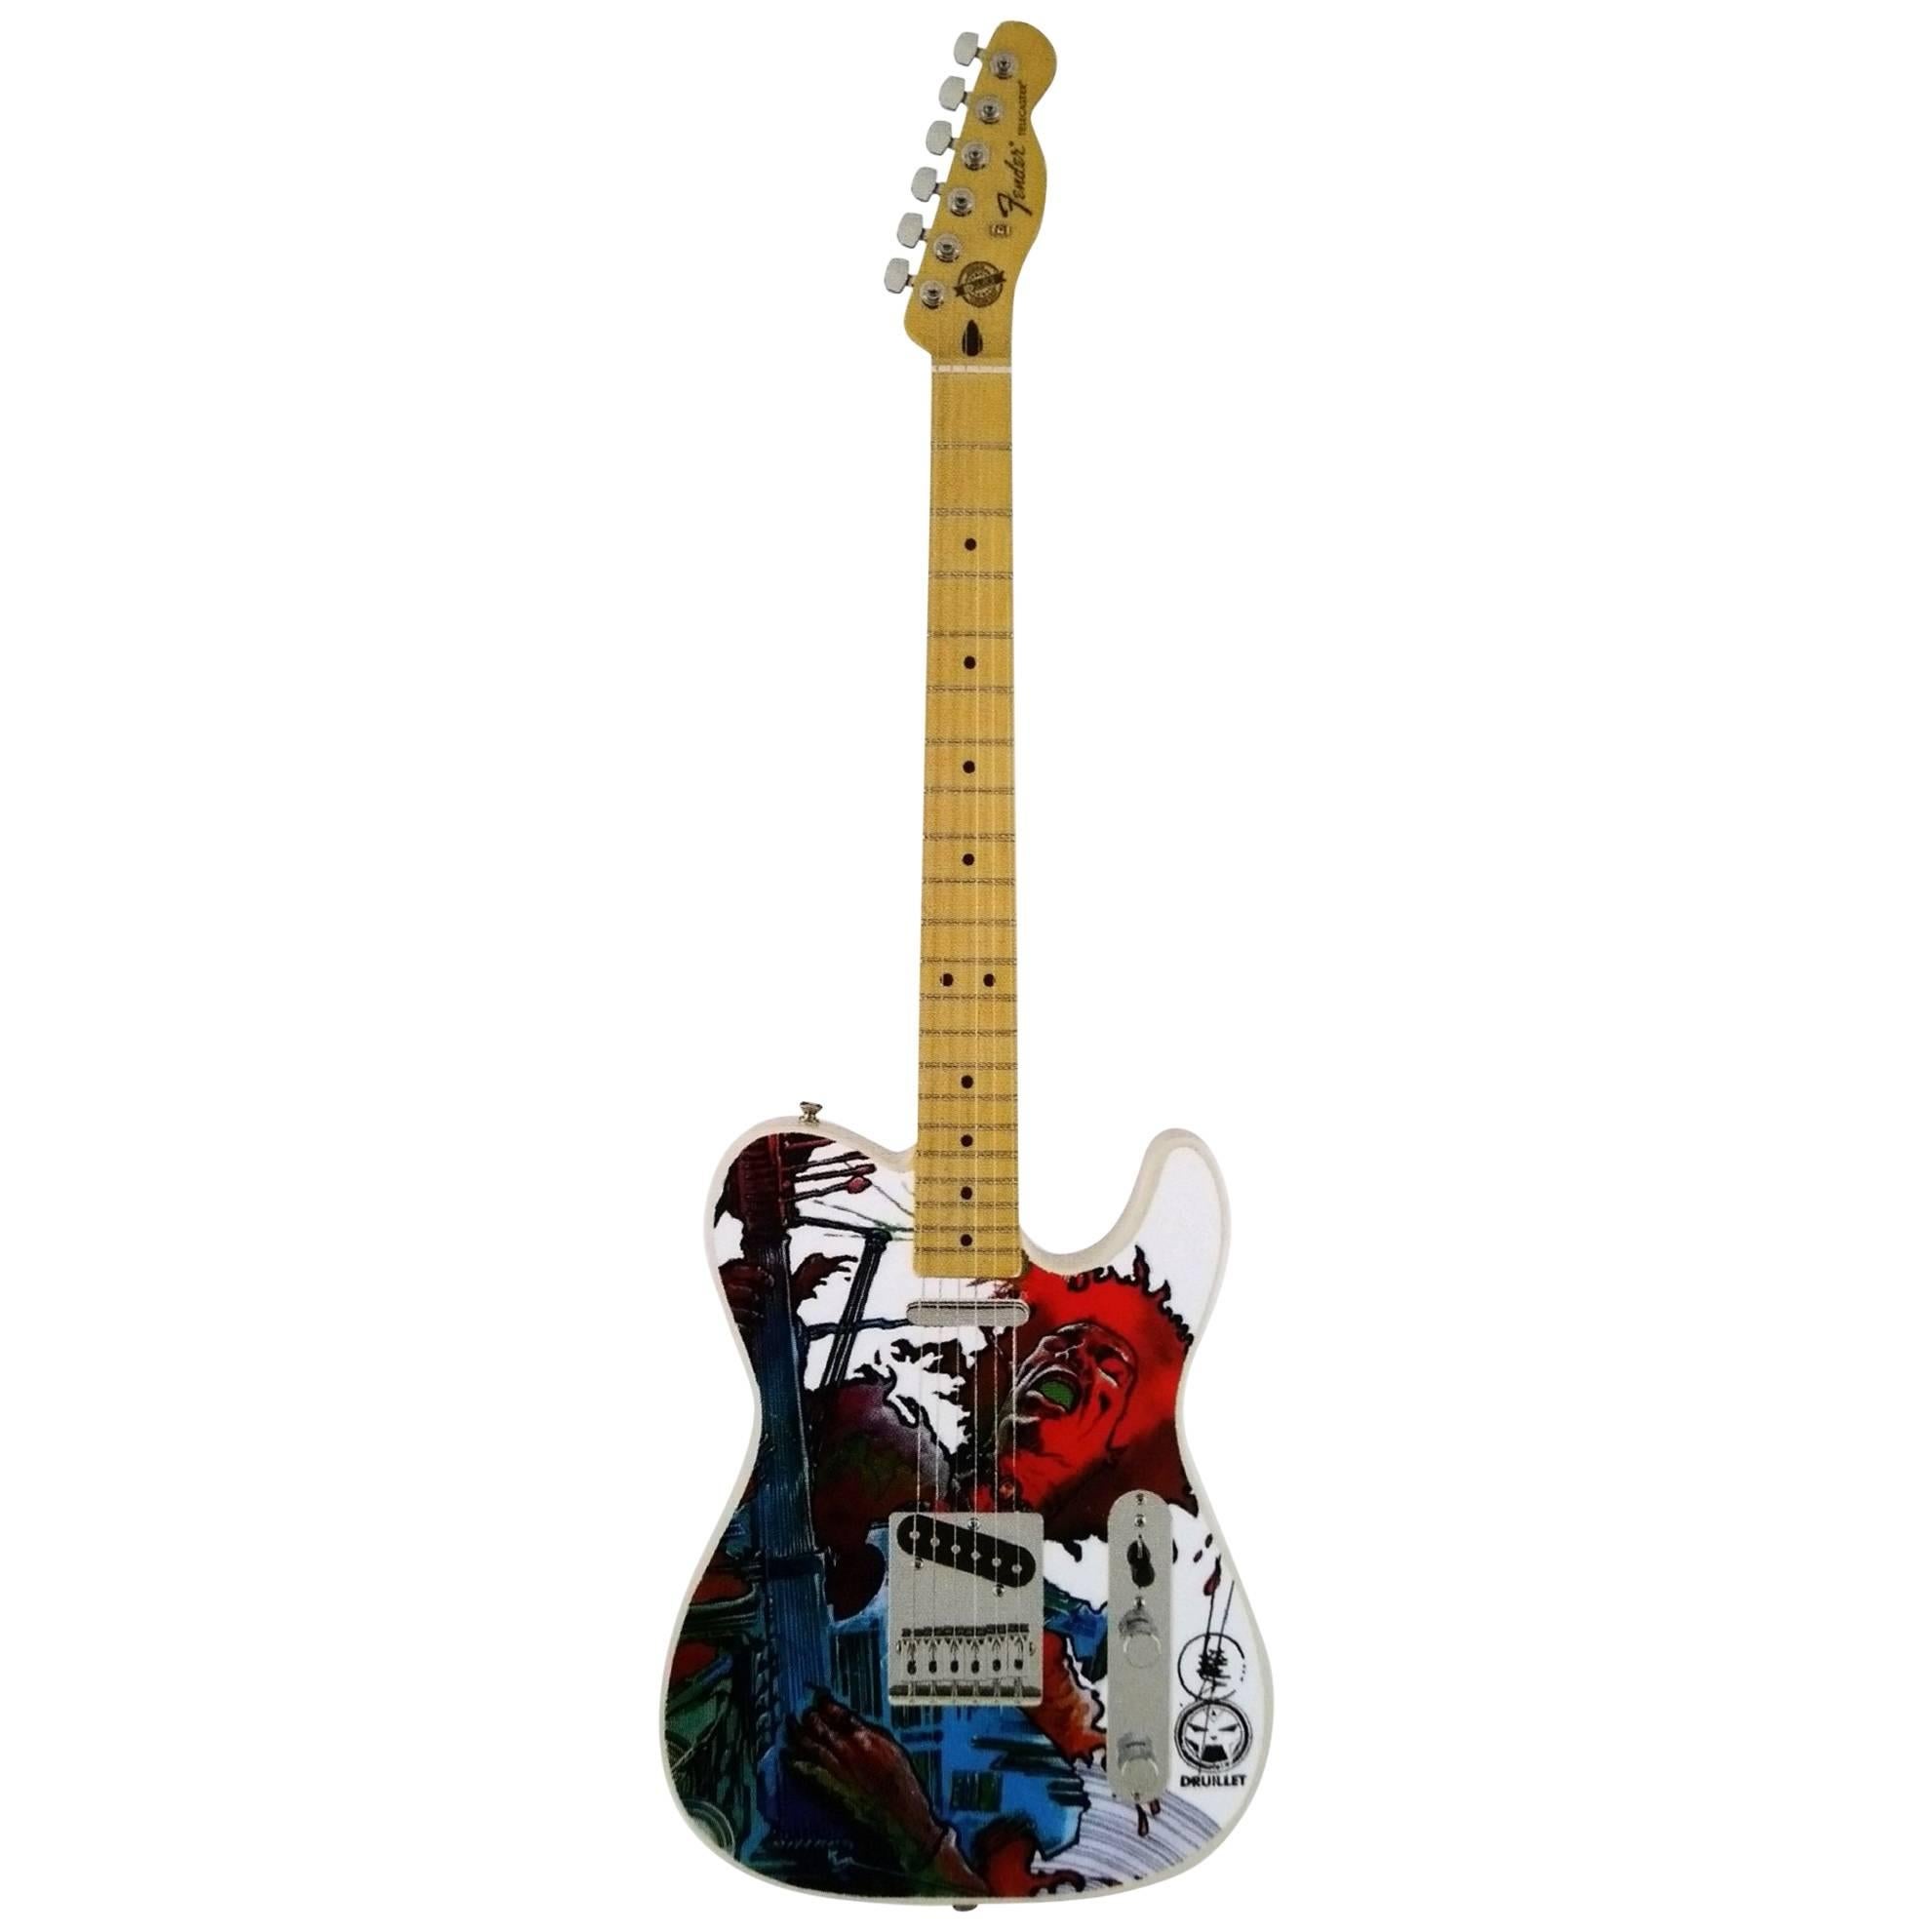 Telecaster Guitar Illustrated by Philippe Druillet